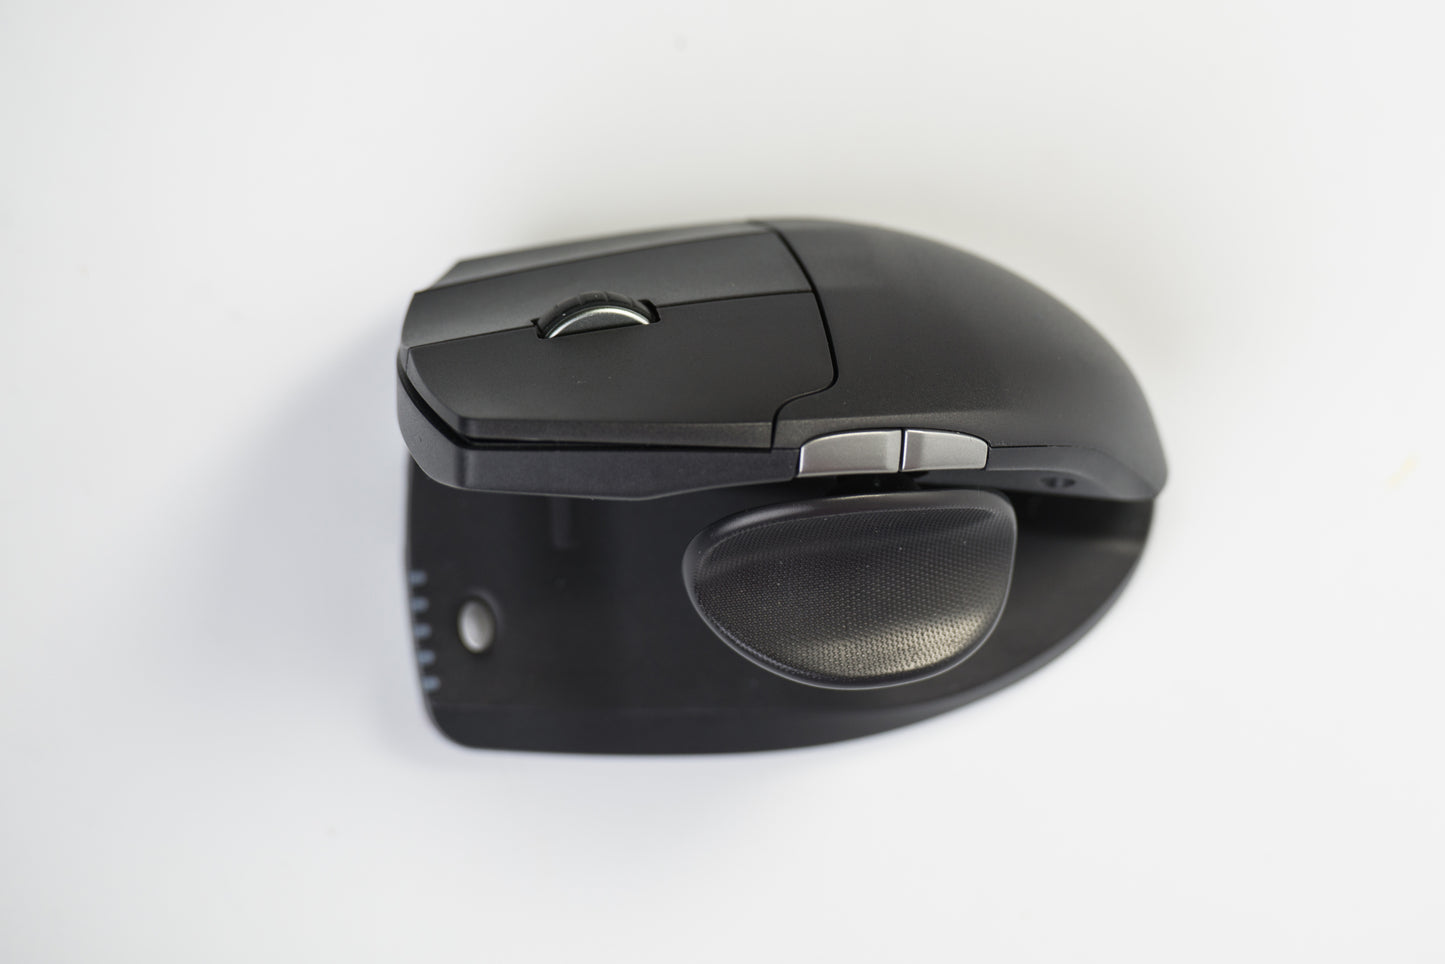 RELAX ERGO MOUSE - Wireless, ergonomic mouse with flexibly adjustable thumb support - With 6 programmable buttons